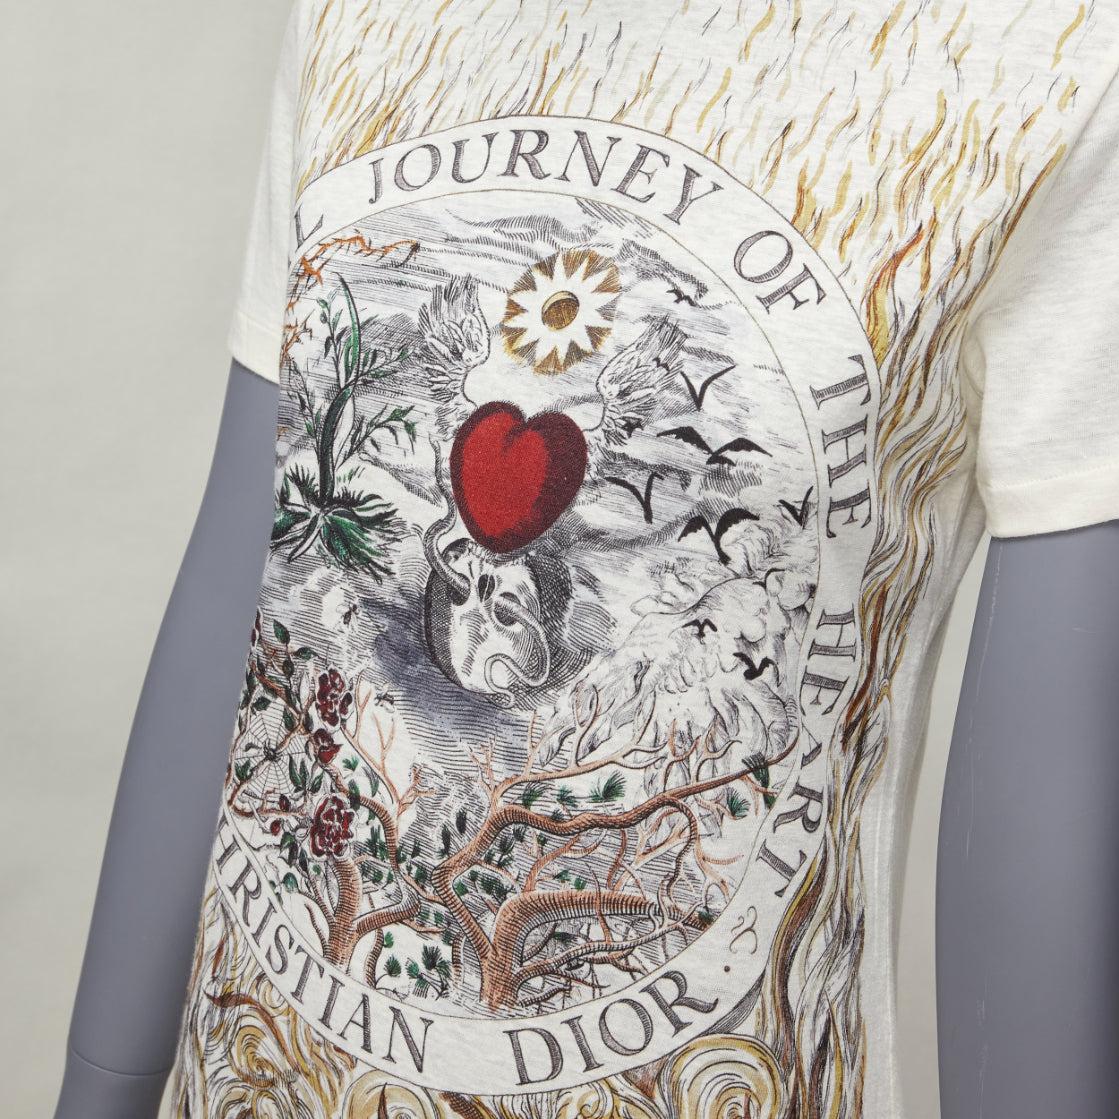 DIOR Brutal Journey OF The Heart graphic print ecru cotton linen tshirt XS For Sale 3